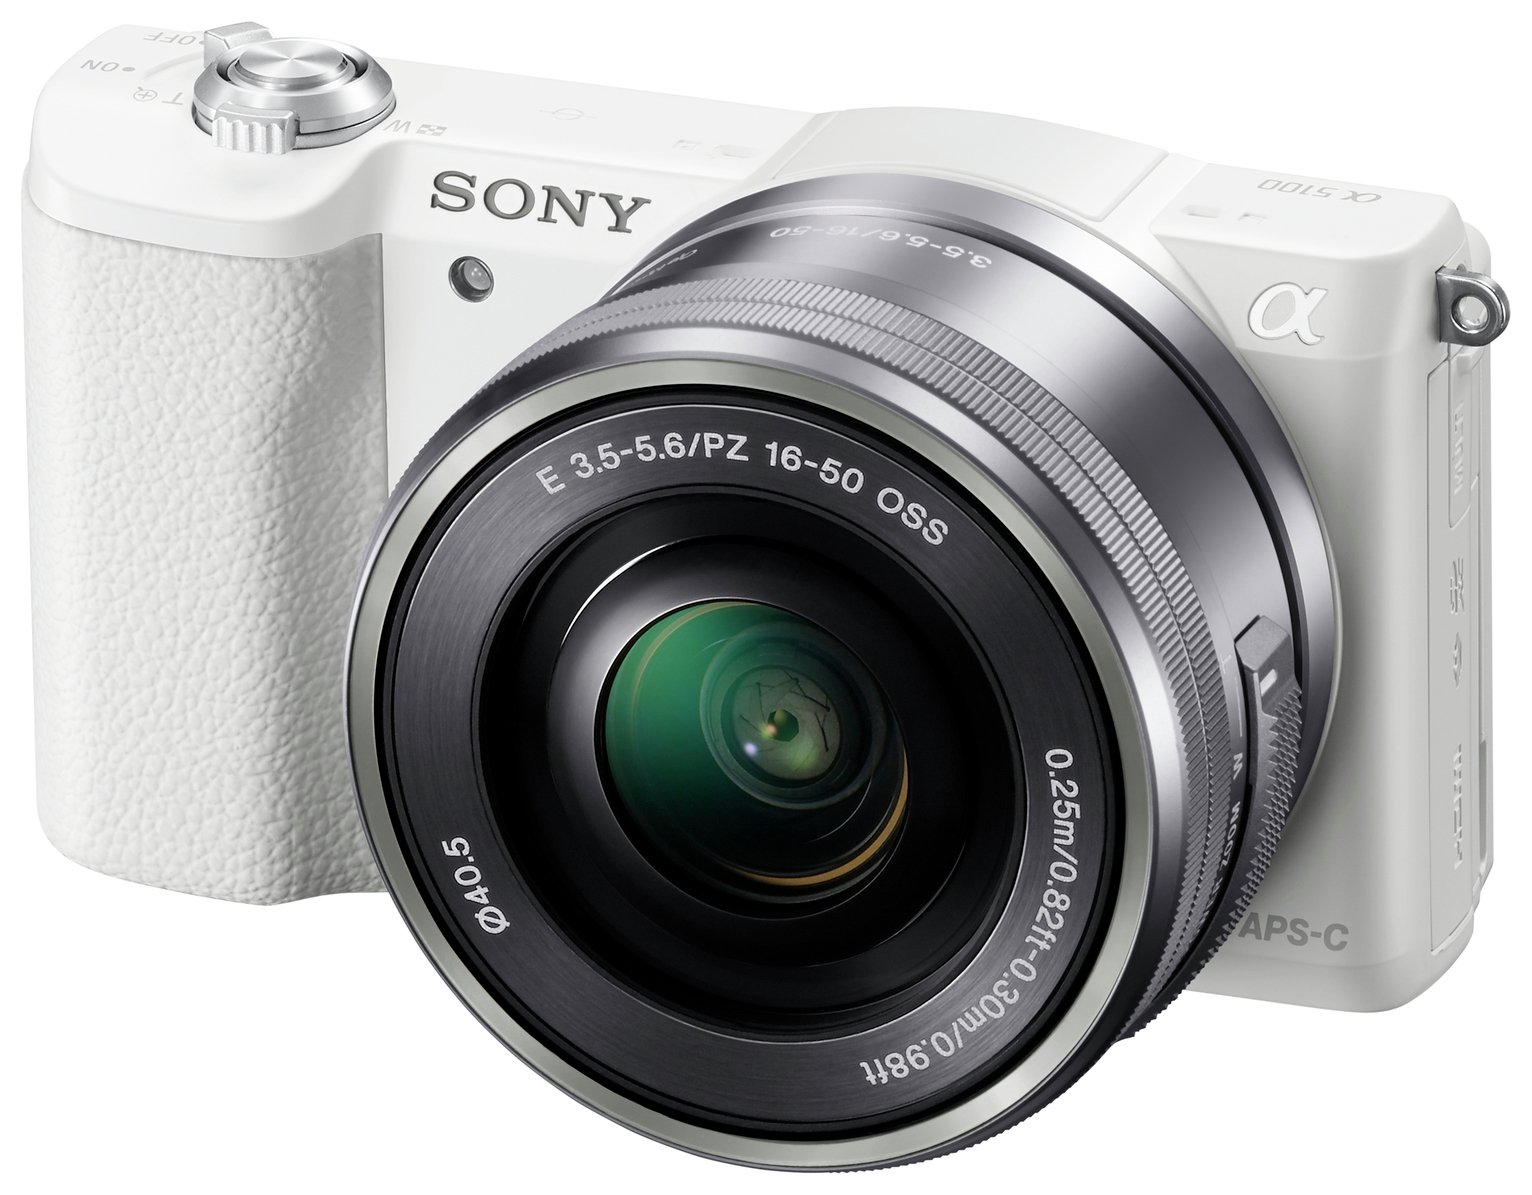 Sony A5100 Mirrorless Camera With 16-50mm Lens Review